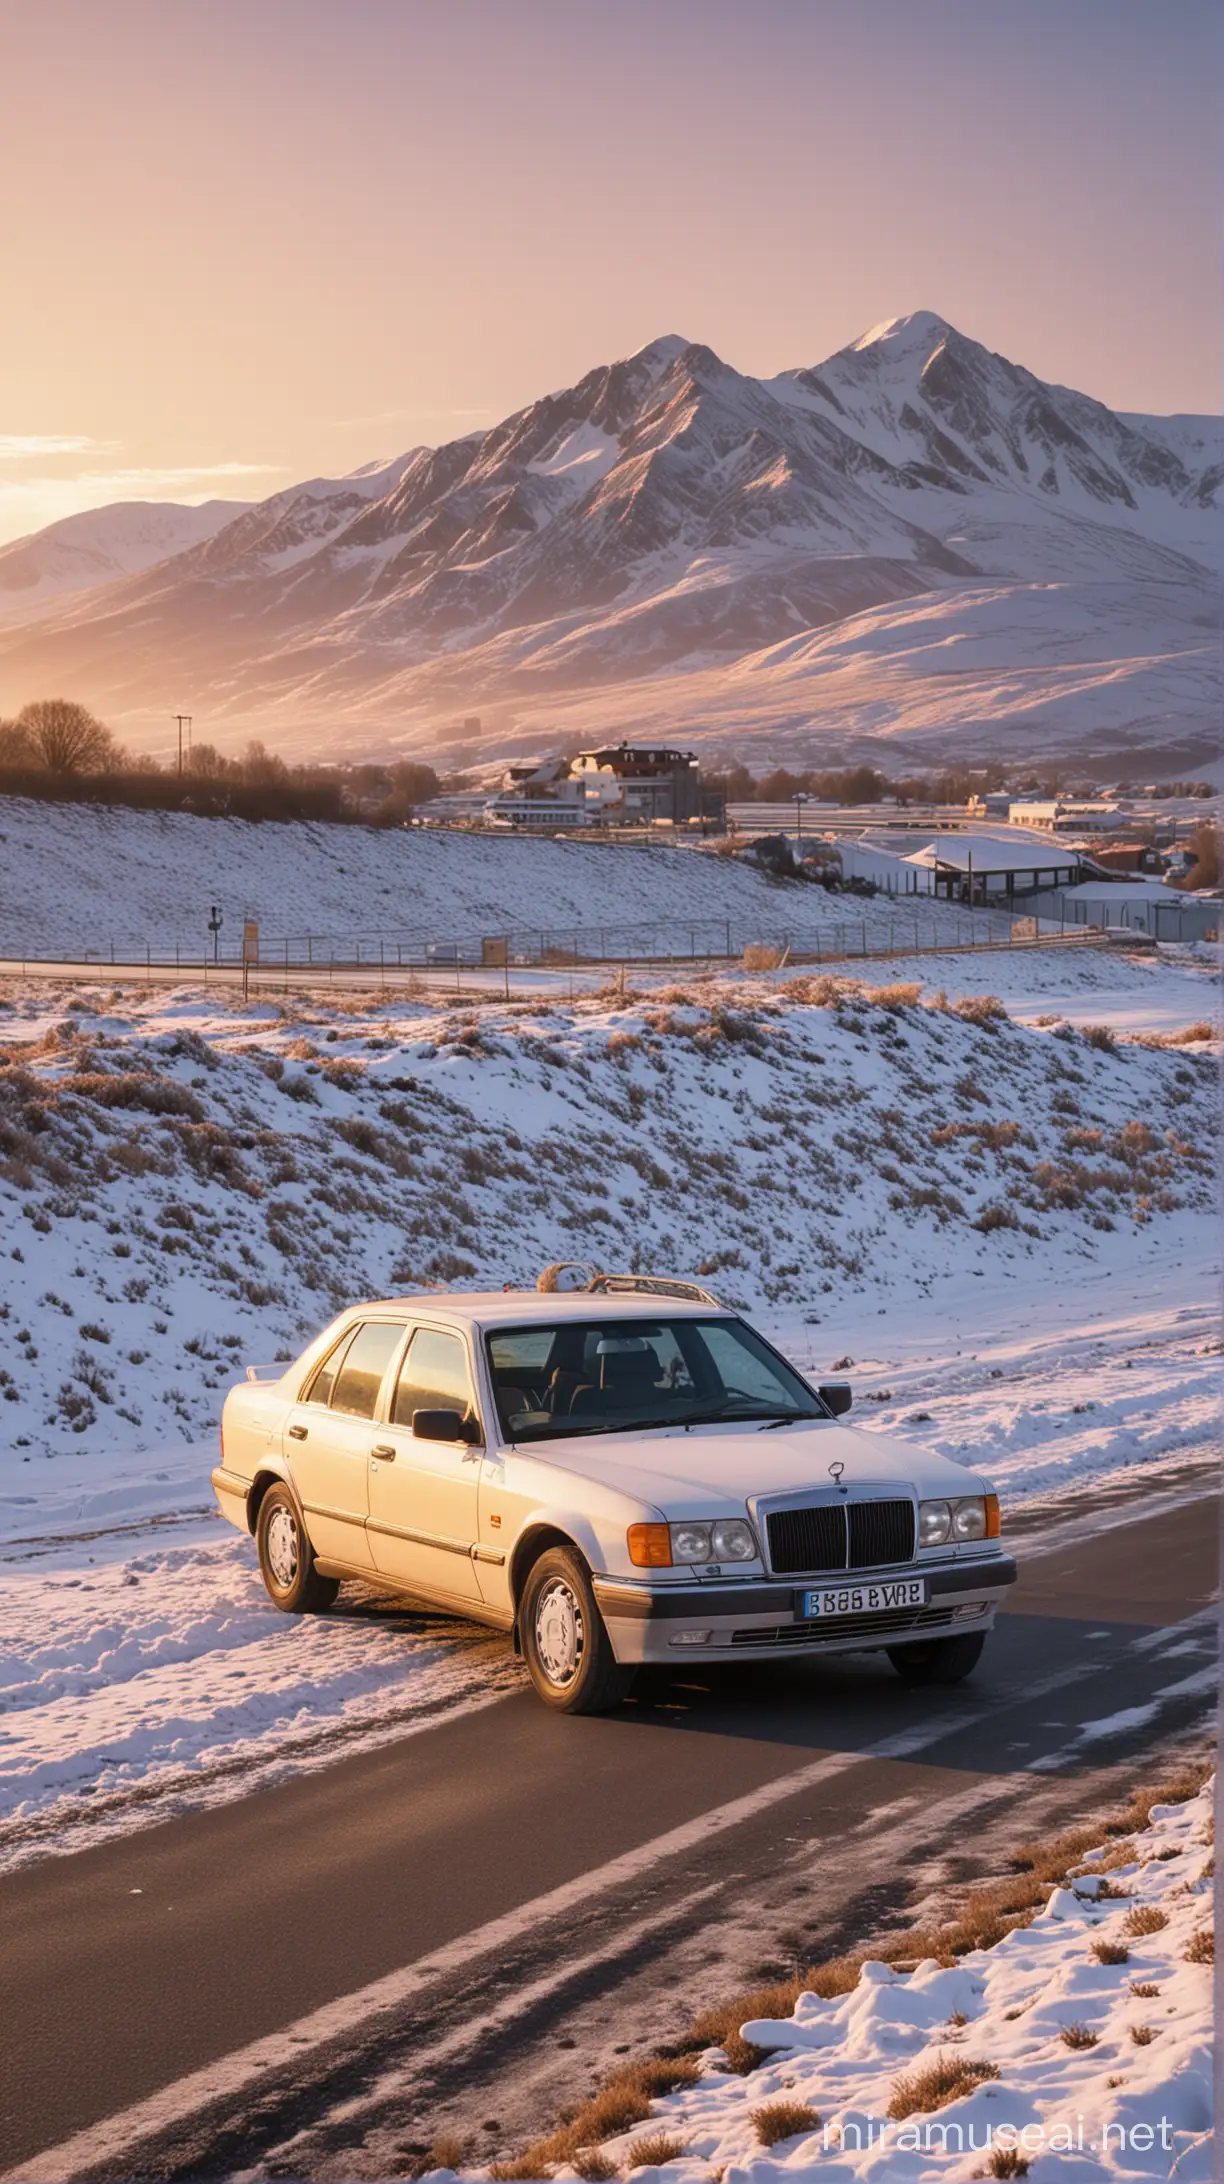 Vintage MercedesBenz E220 Parked at Sunset on Isolated Mountain Road